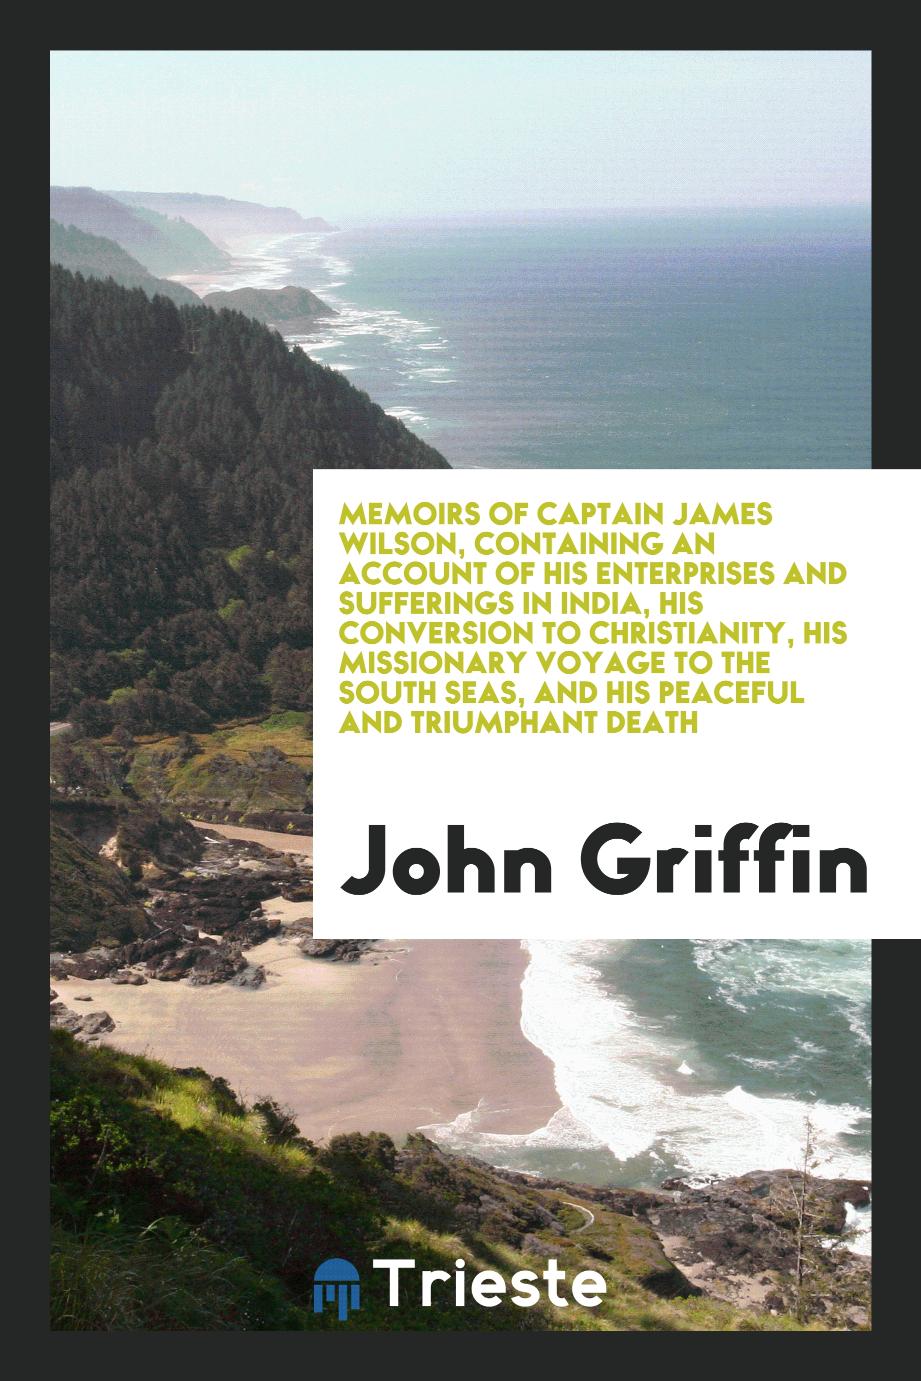 Memoirs of Captain James Wilson, Containing an Account of His Enterprises and Sufferings in India, His Conversion to Christianity, His Missionary Voyage to the South Seas, and His Peaceful and Triumphant Death